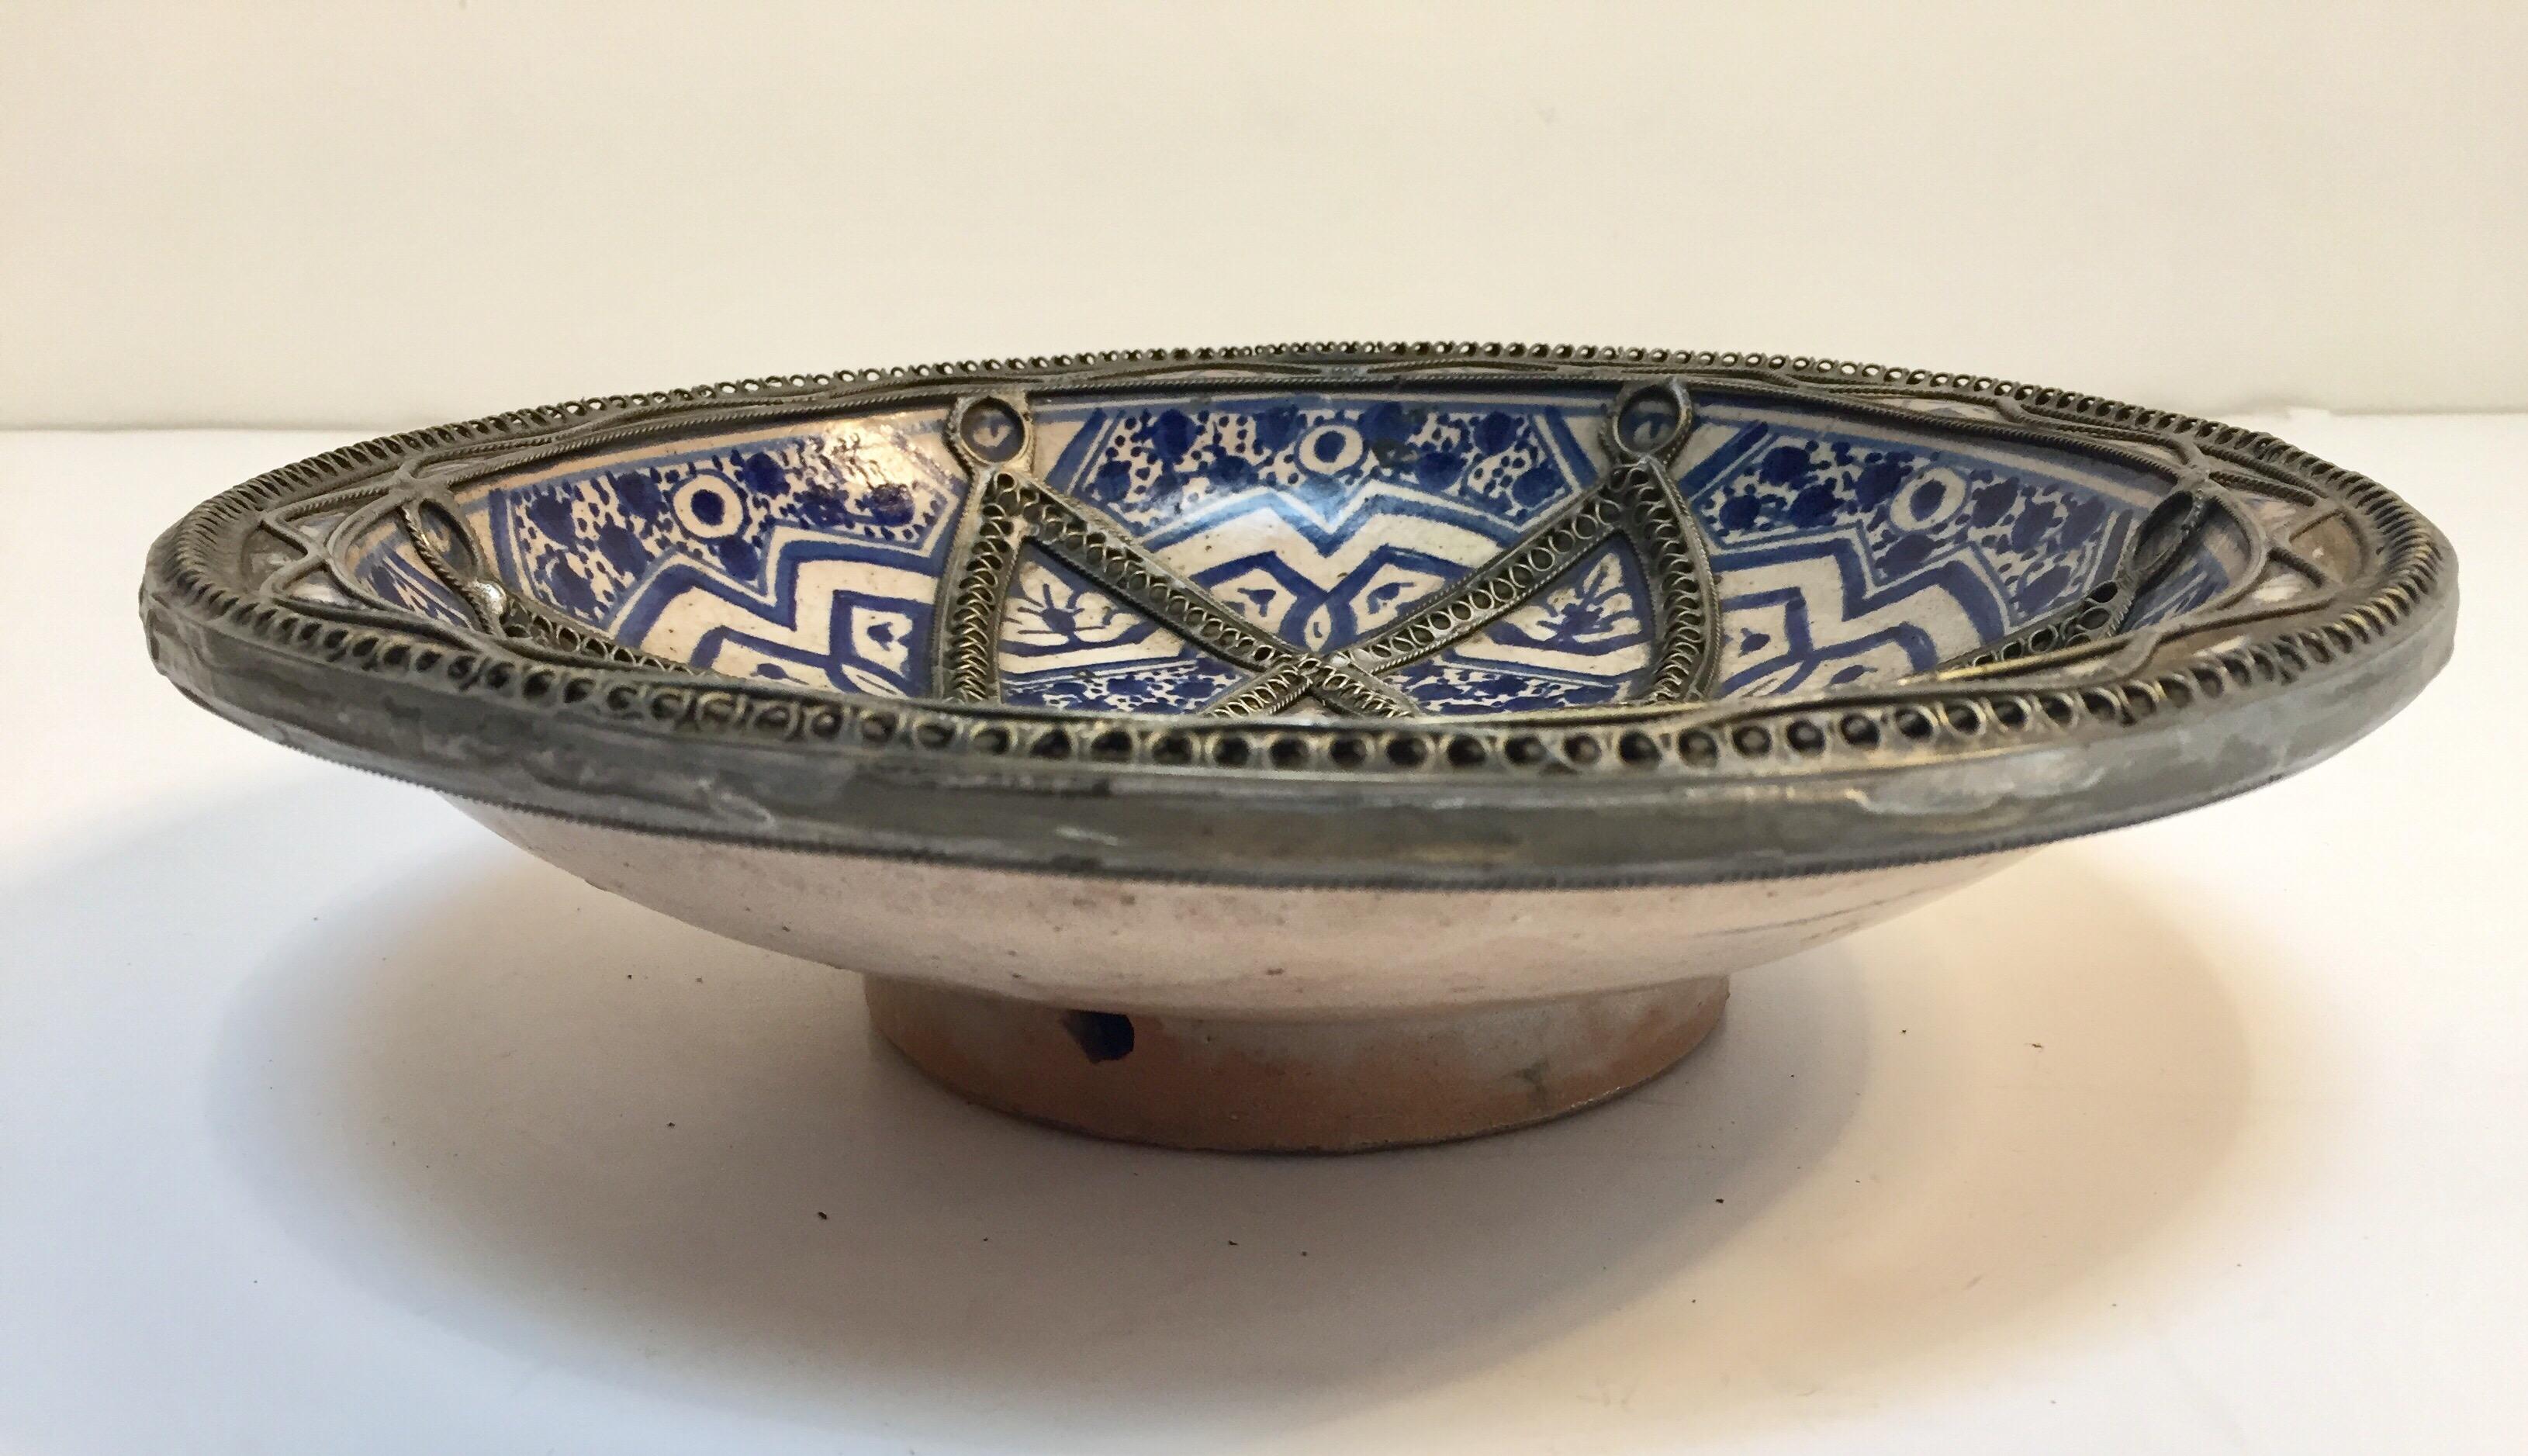 20th Century Decorative Moorish Blue and White Handcrafted Ceramic Bowl from Fez